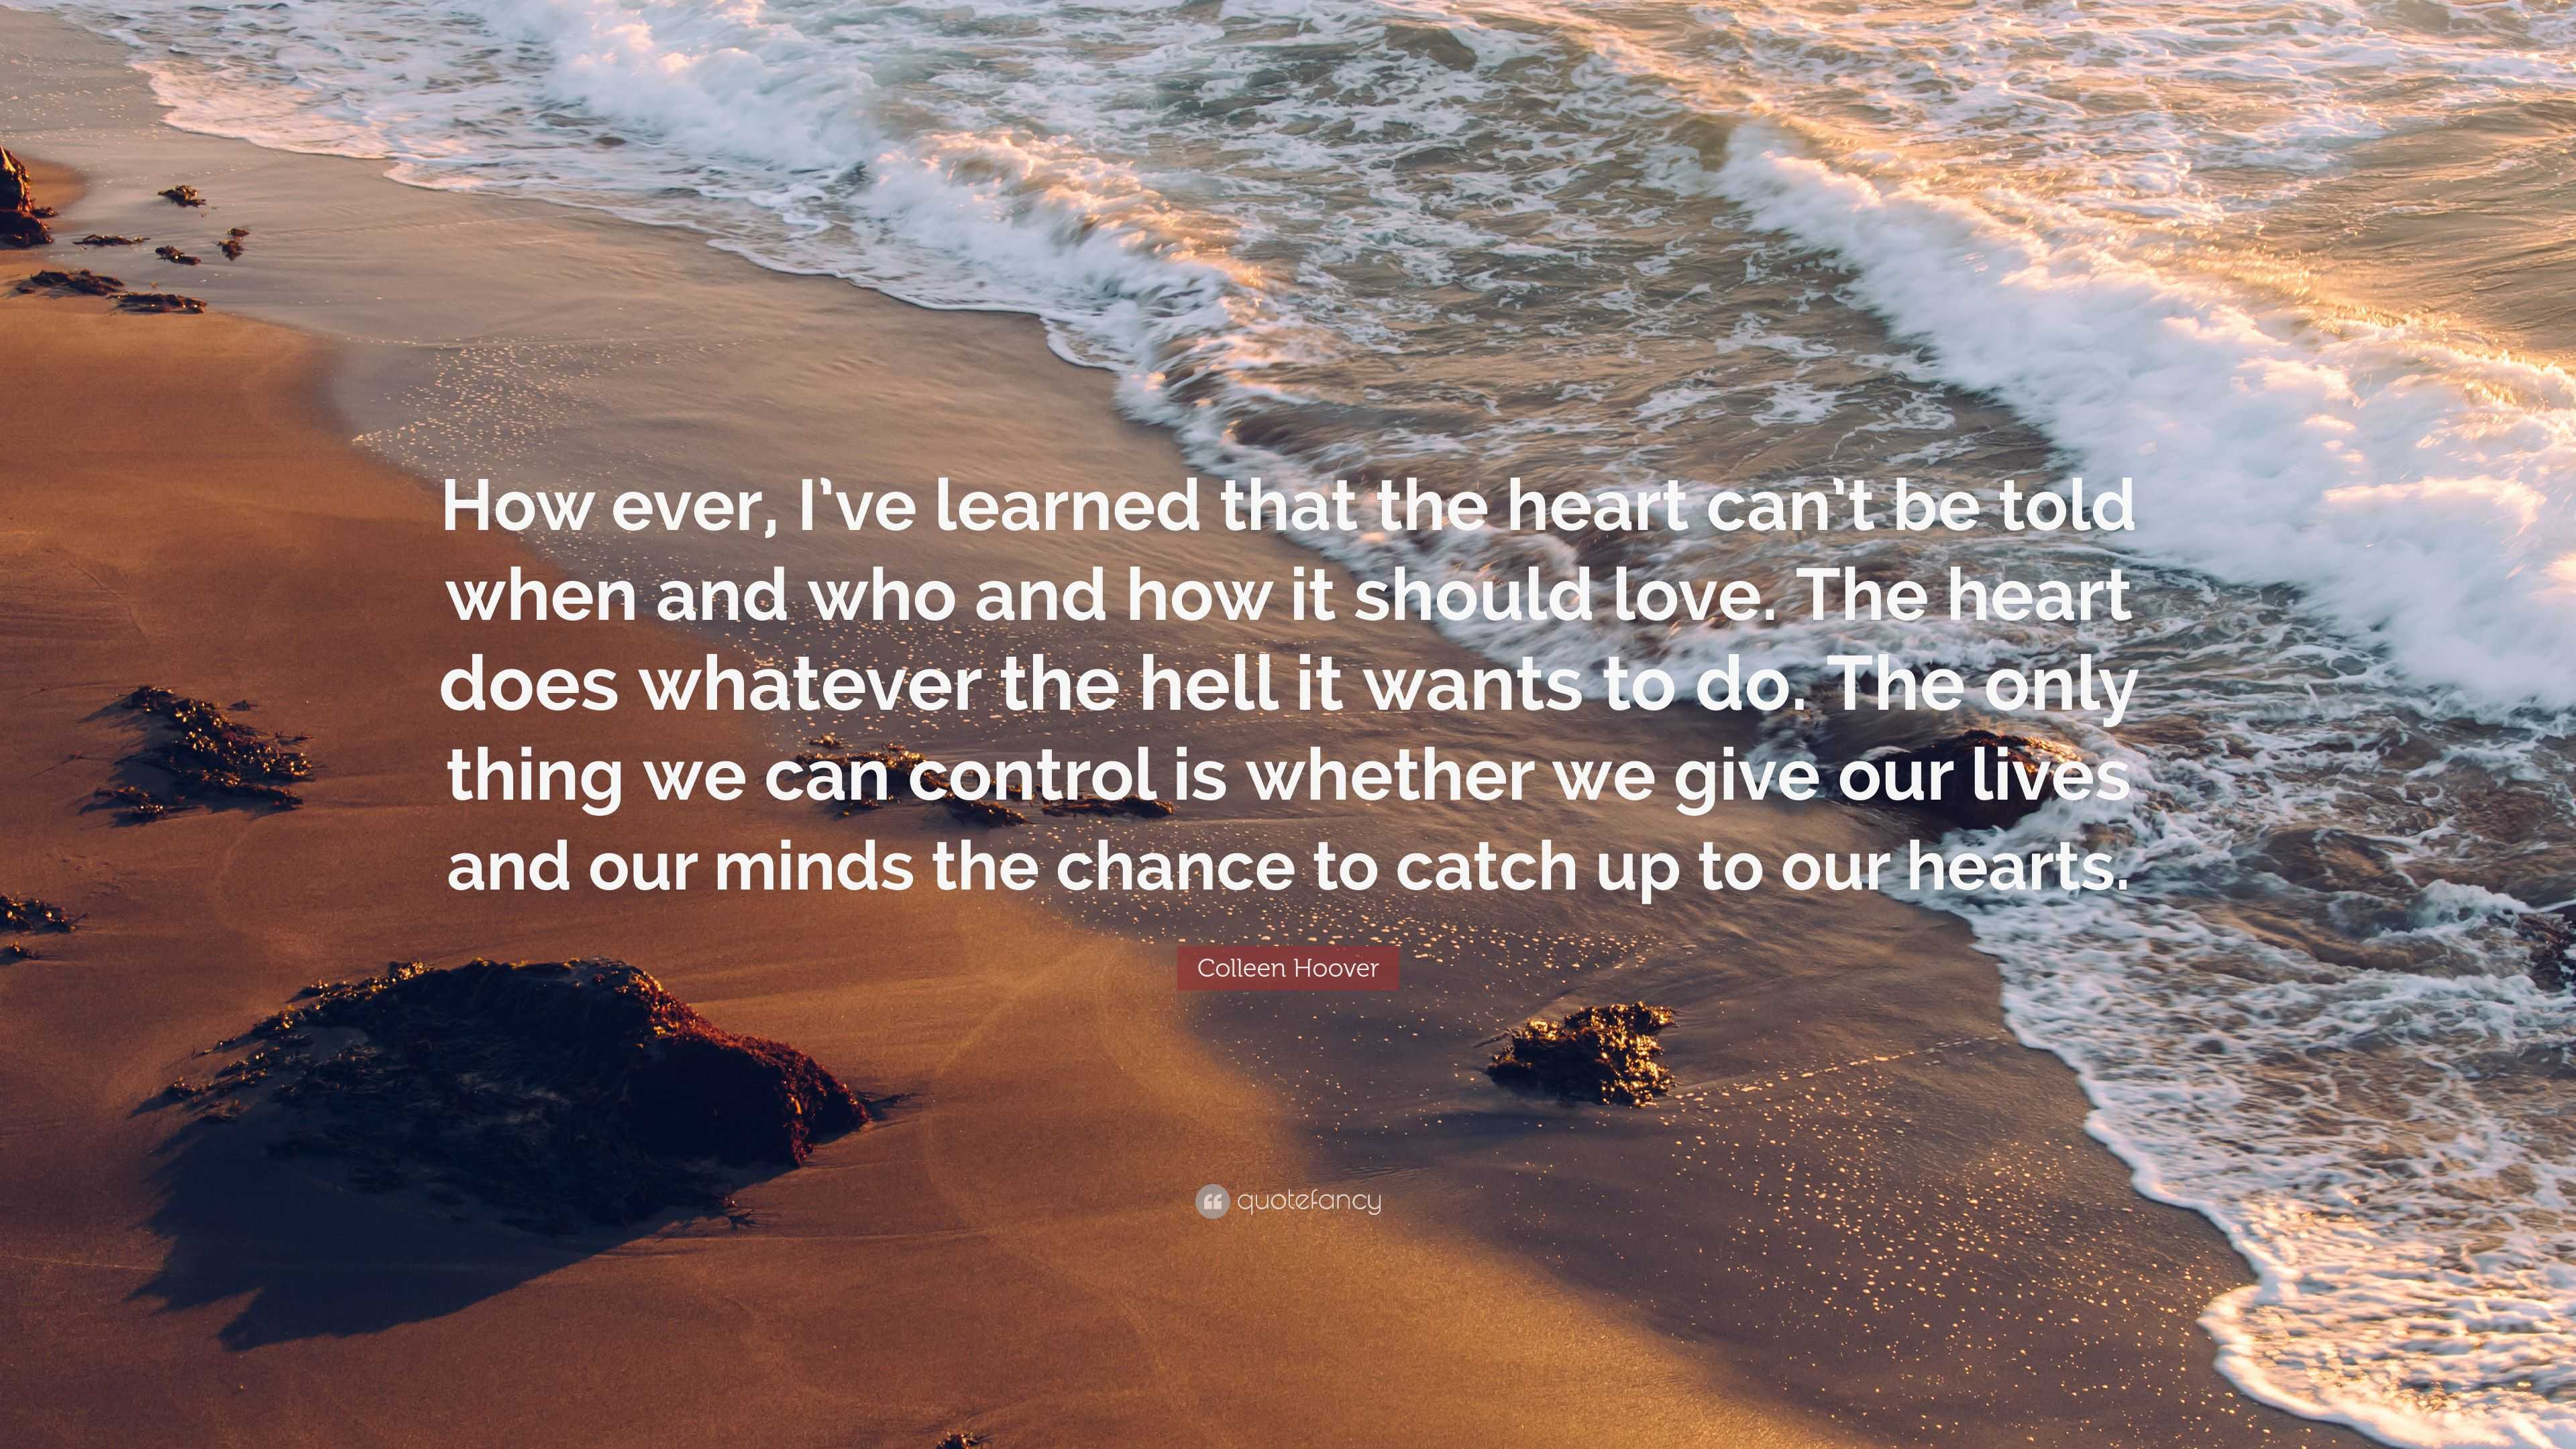 Colleen Hoover Quote: “How ever, I’ve learned that the heart can’t be